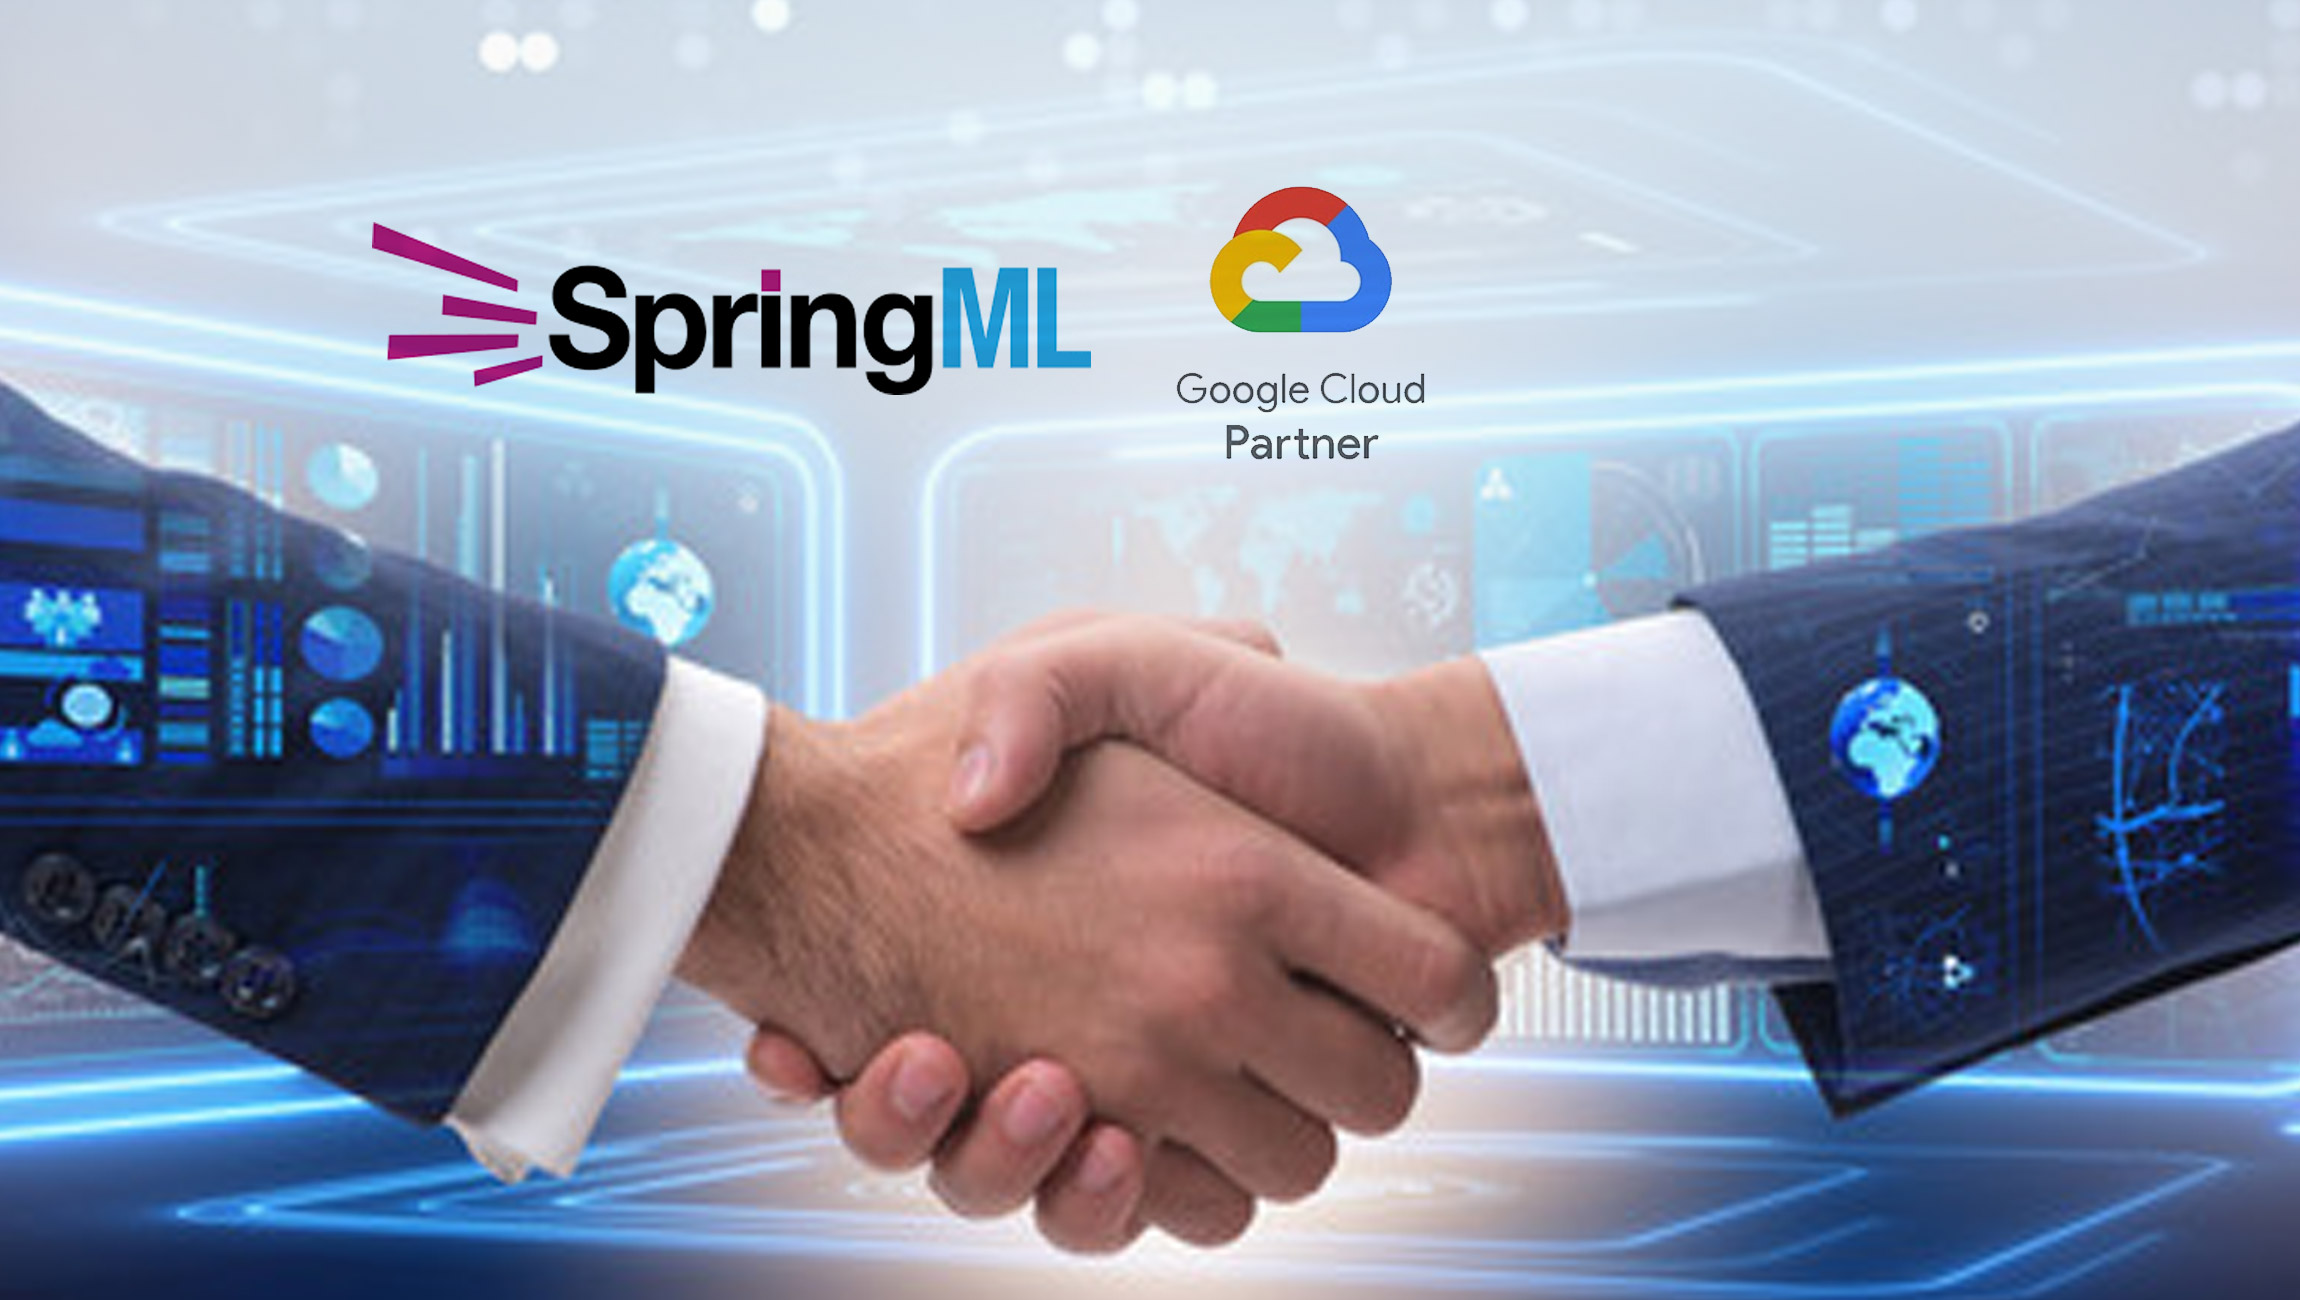 SpringML is Named as Google Cloud's Expertise Partner of the Month for February